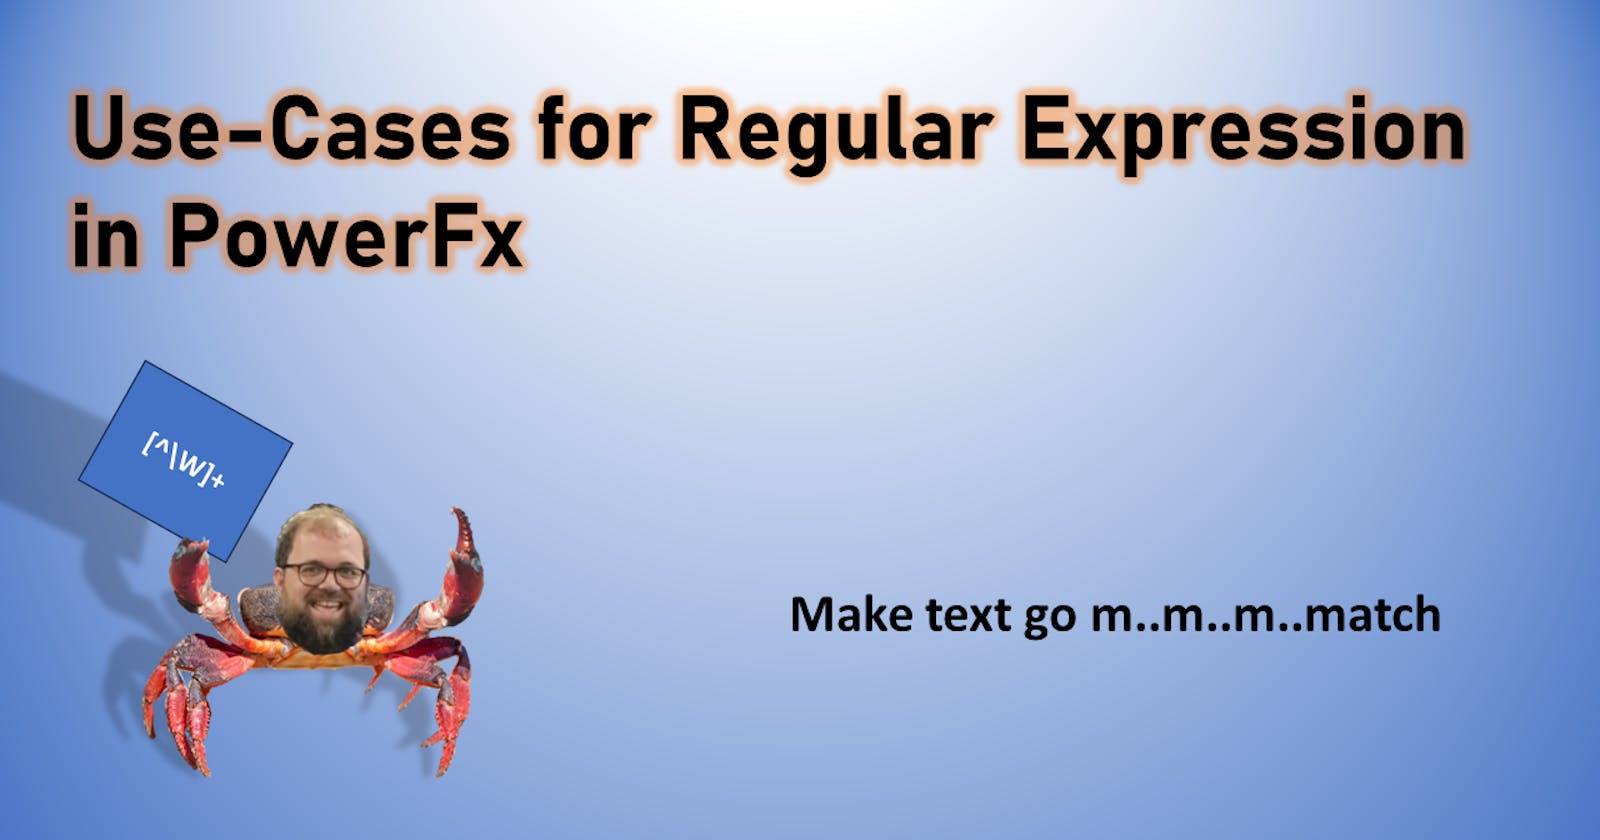 Use-Cases for Regular Expression in PowerFx